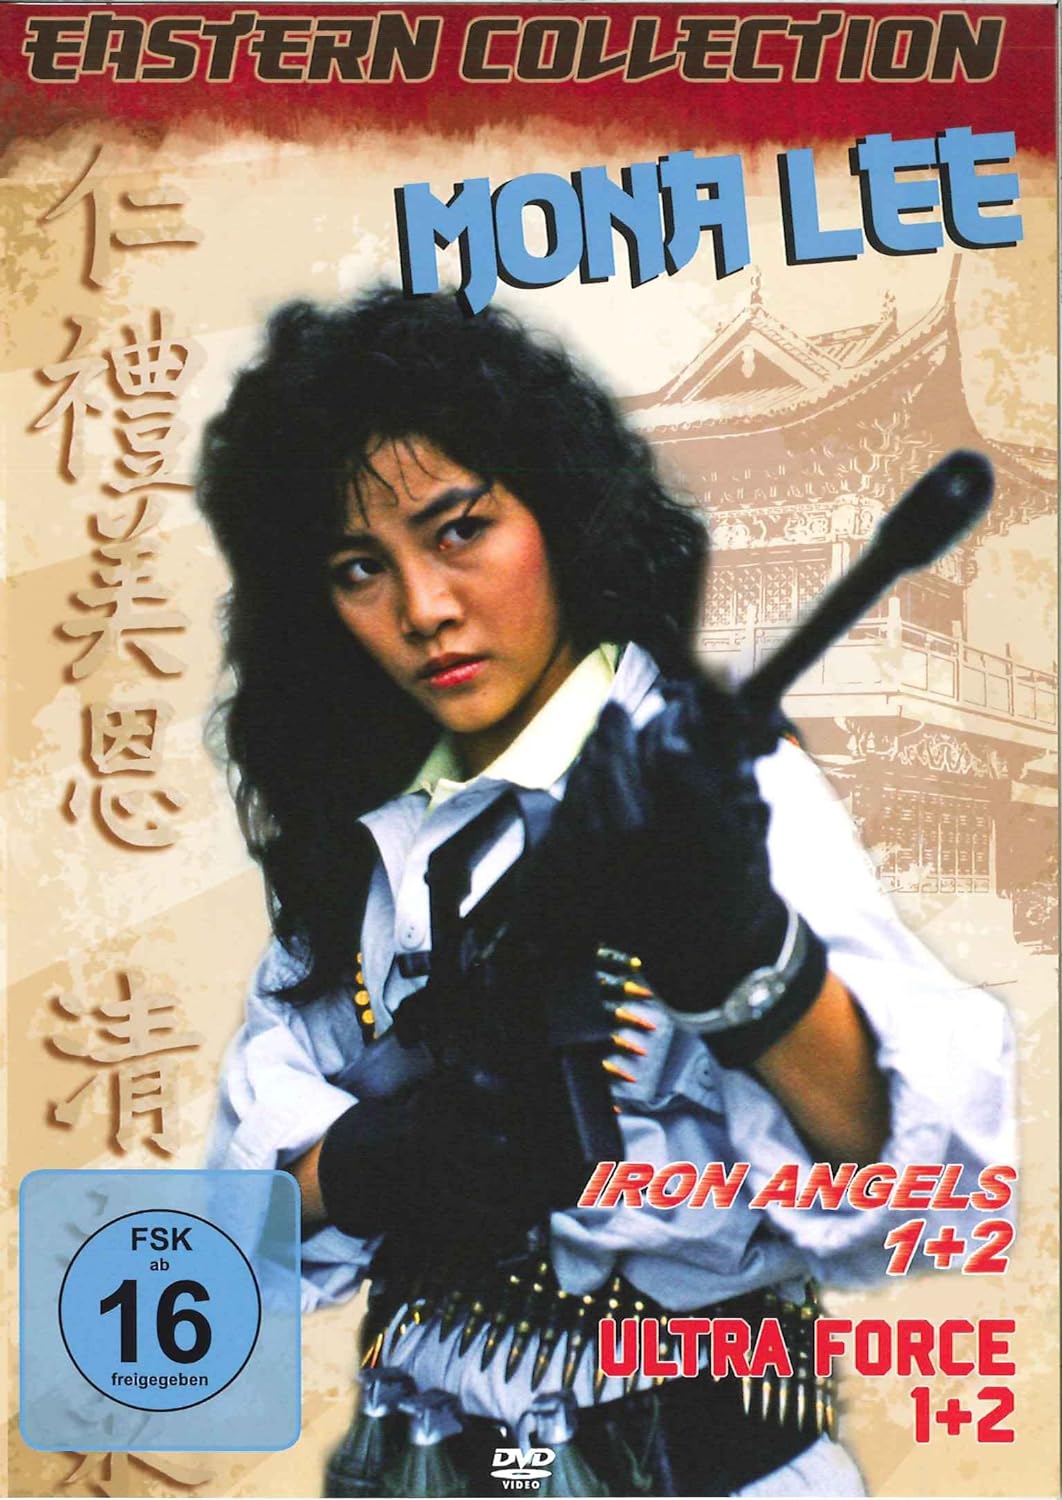 Mona Lee Eastern Collection – Iron Angels 1+2 / Ultra Force 1+2 [2 DVDs]